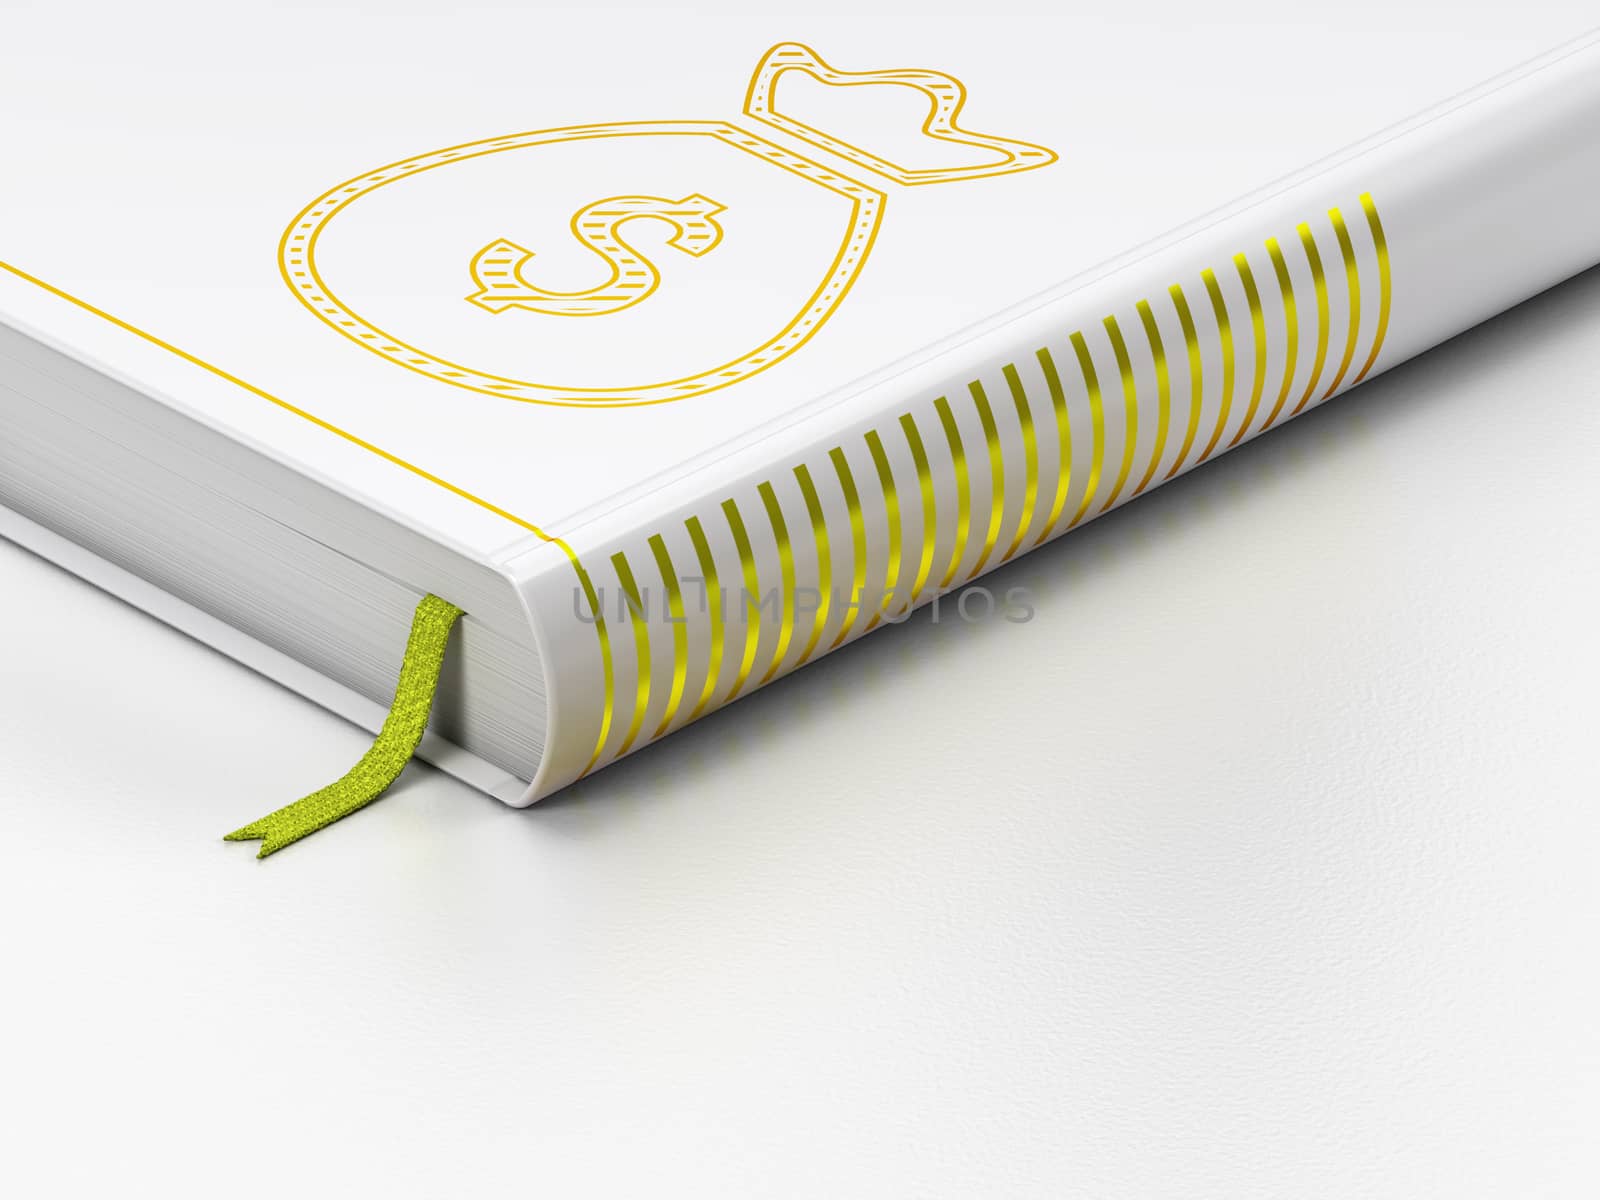 Banking concept: closed book with Gold Money Bag icon on floor, white background, 3d render